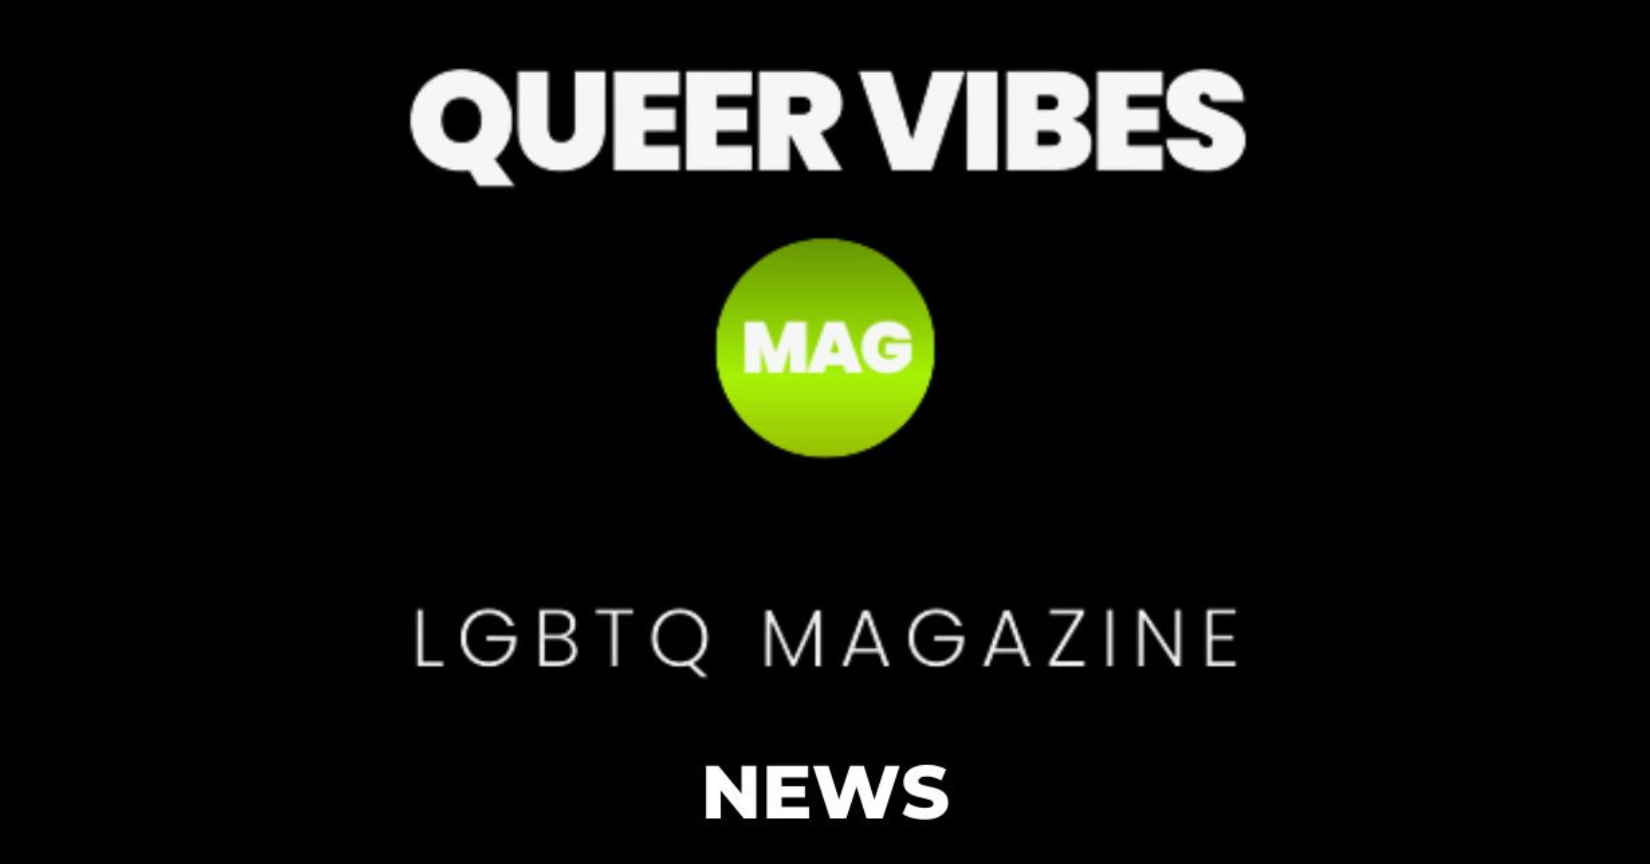 image of queer vibes mag logo